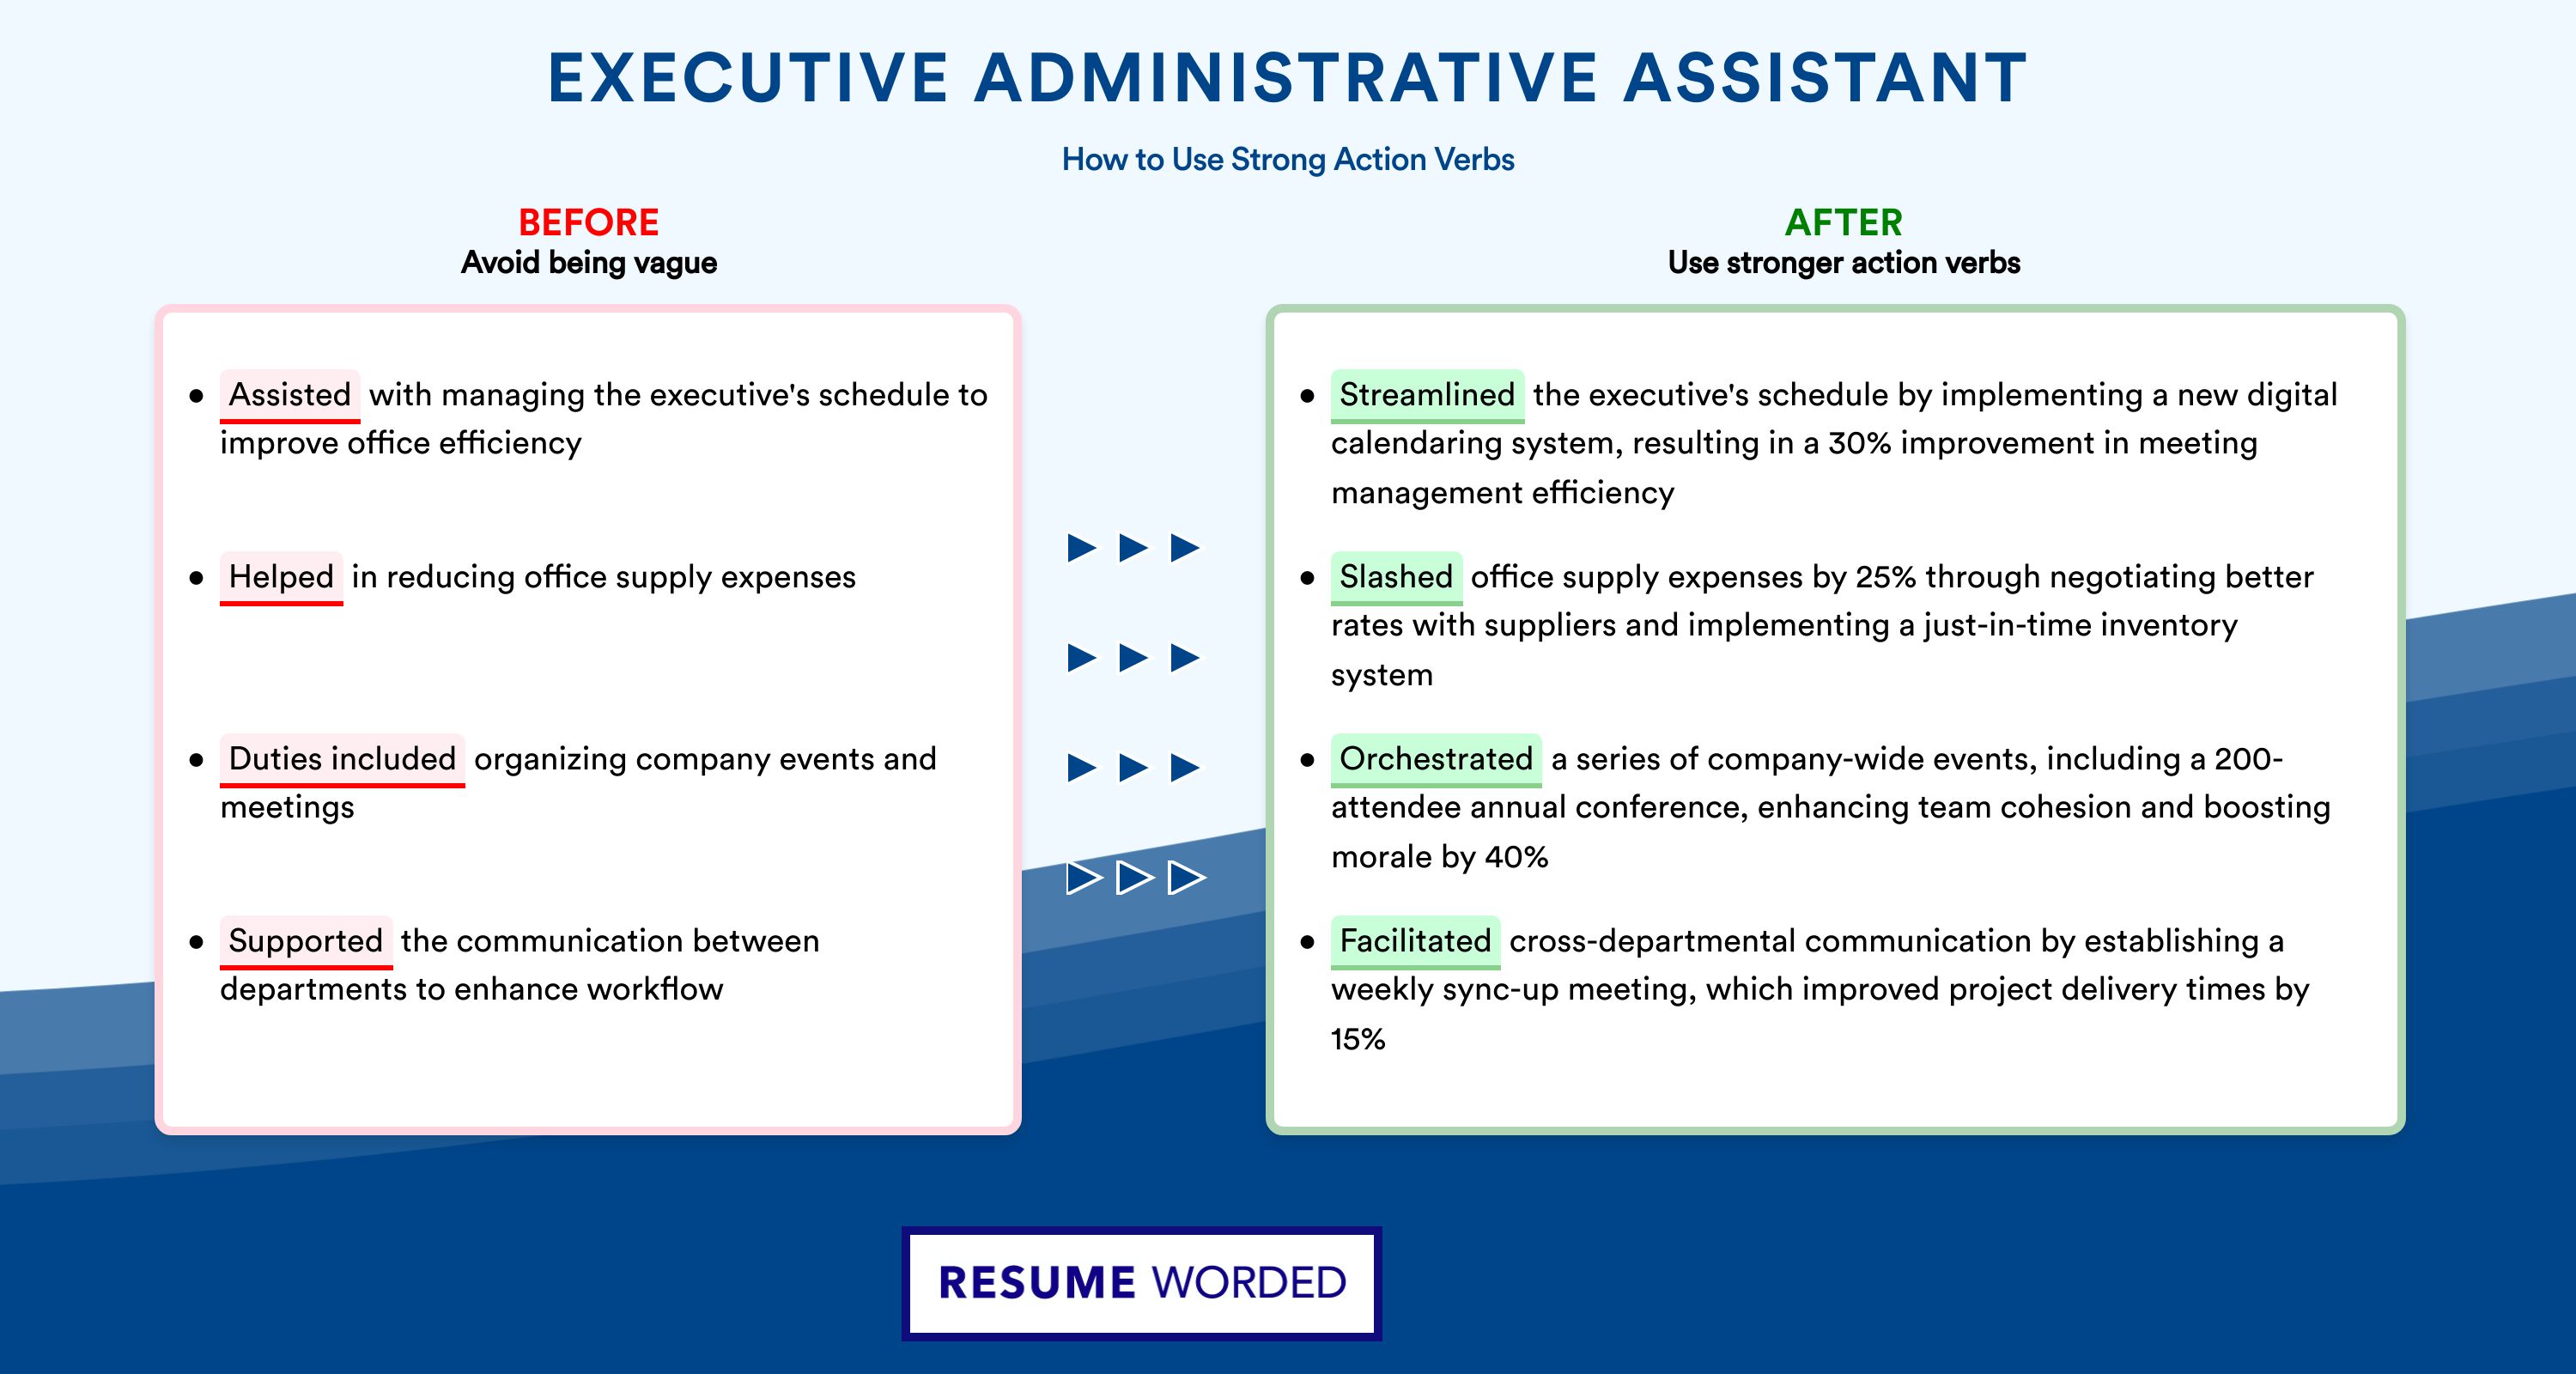 Action Verbs for Executive Administrative Assistant